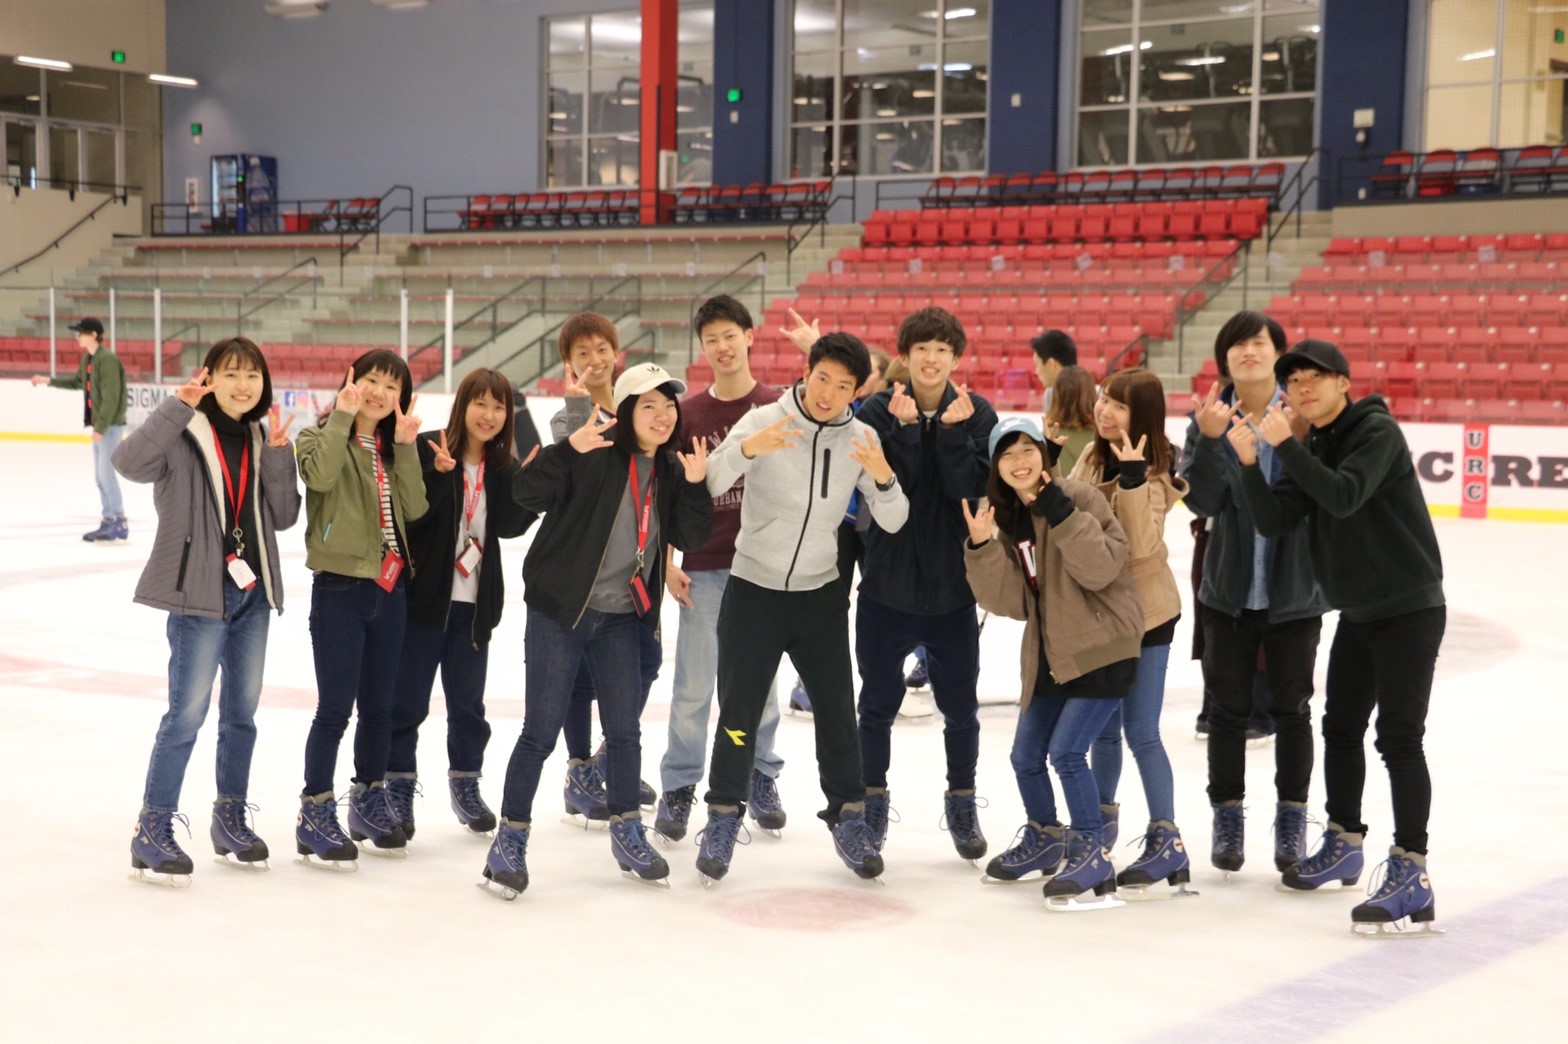 Asia University students at the ice rink